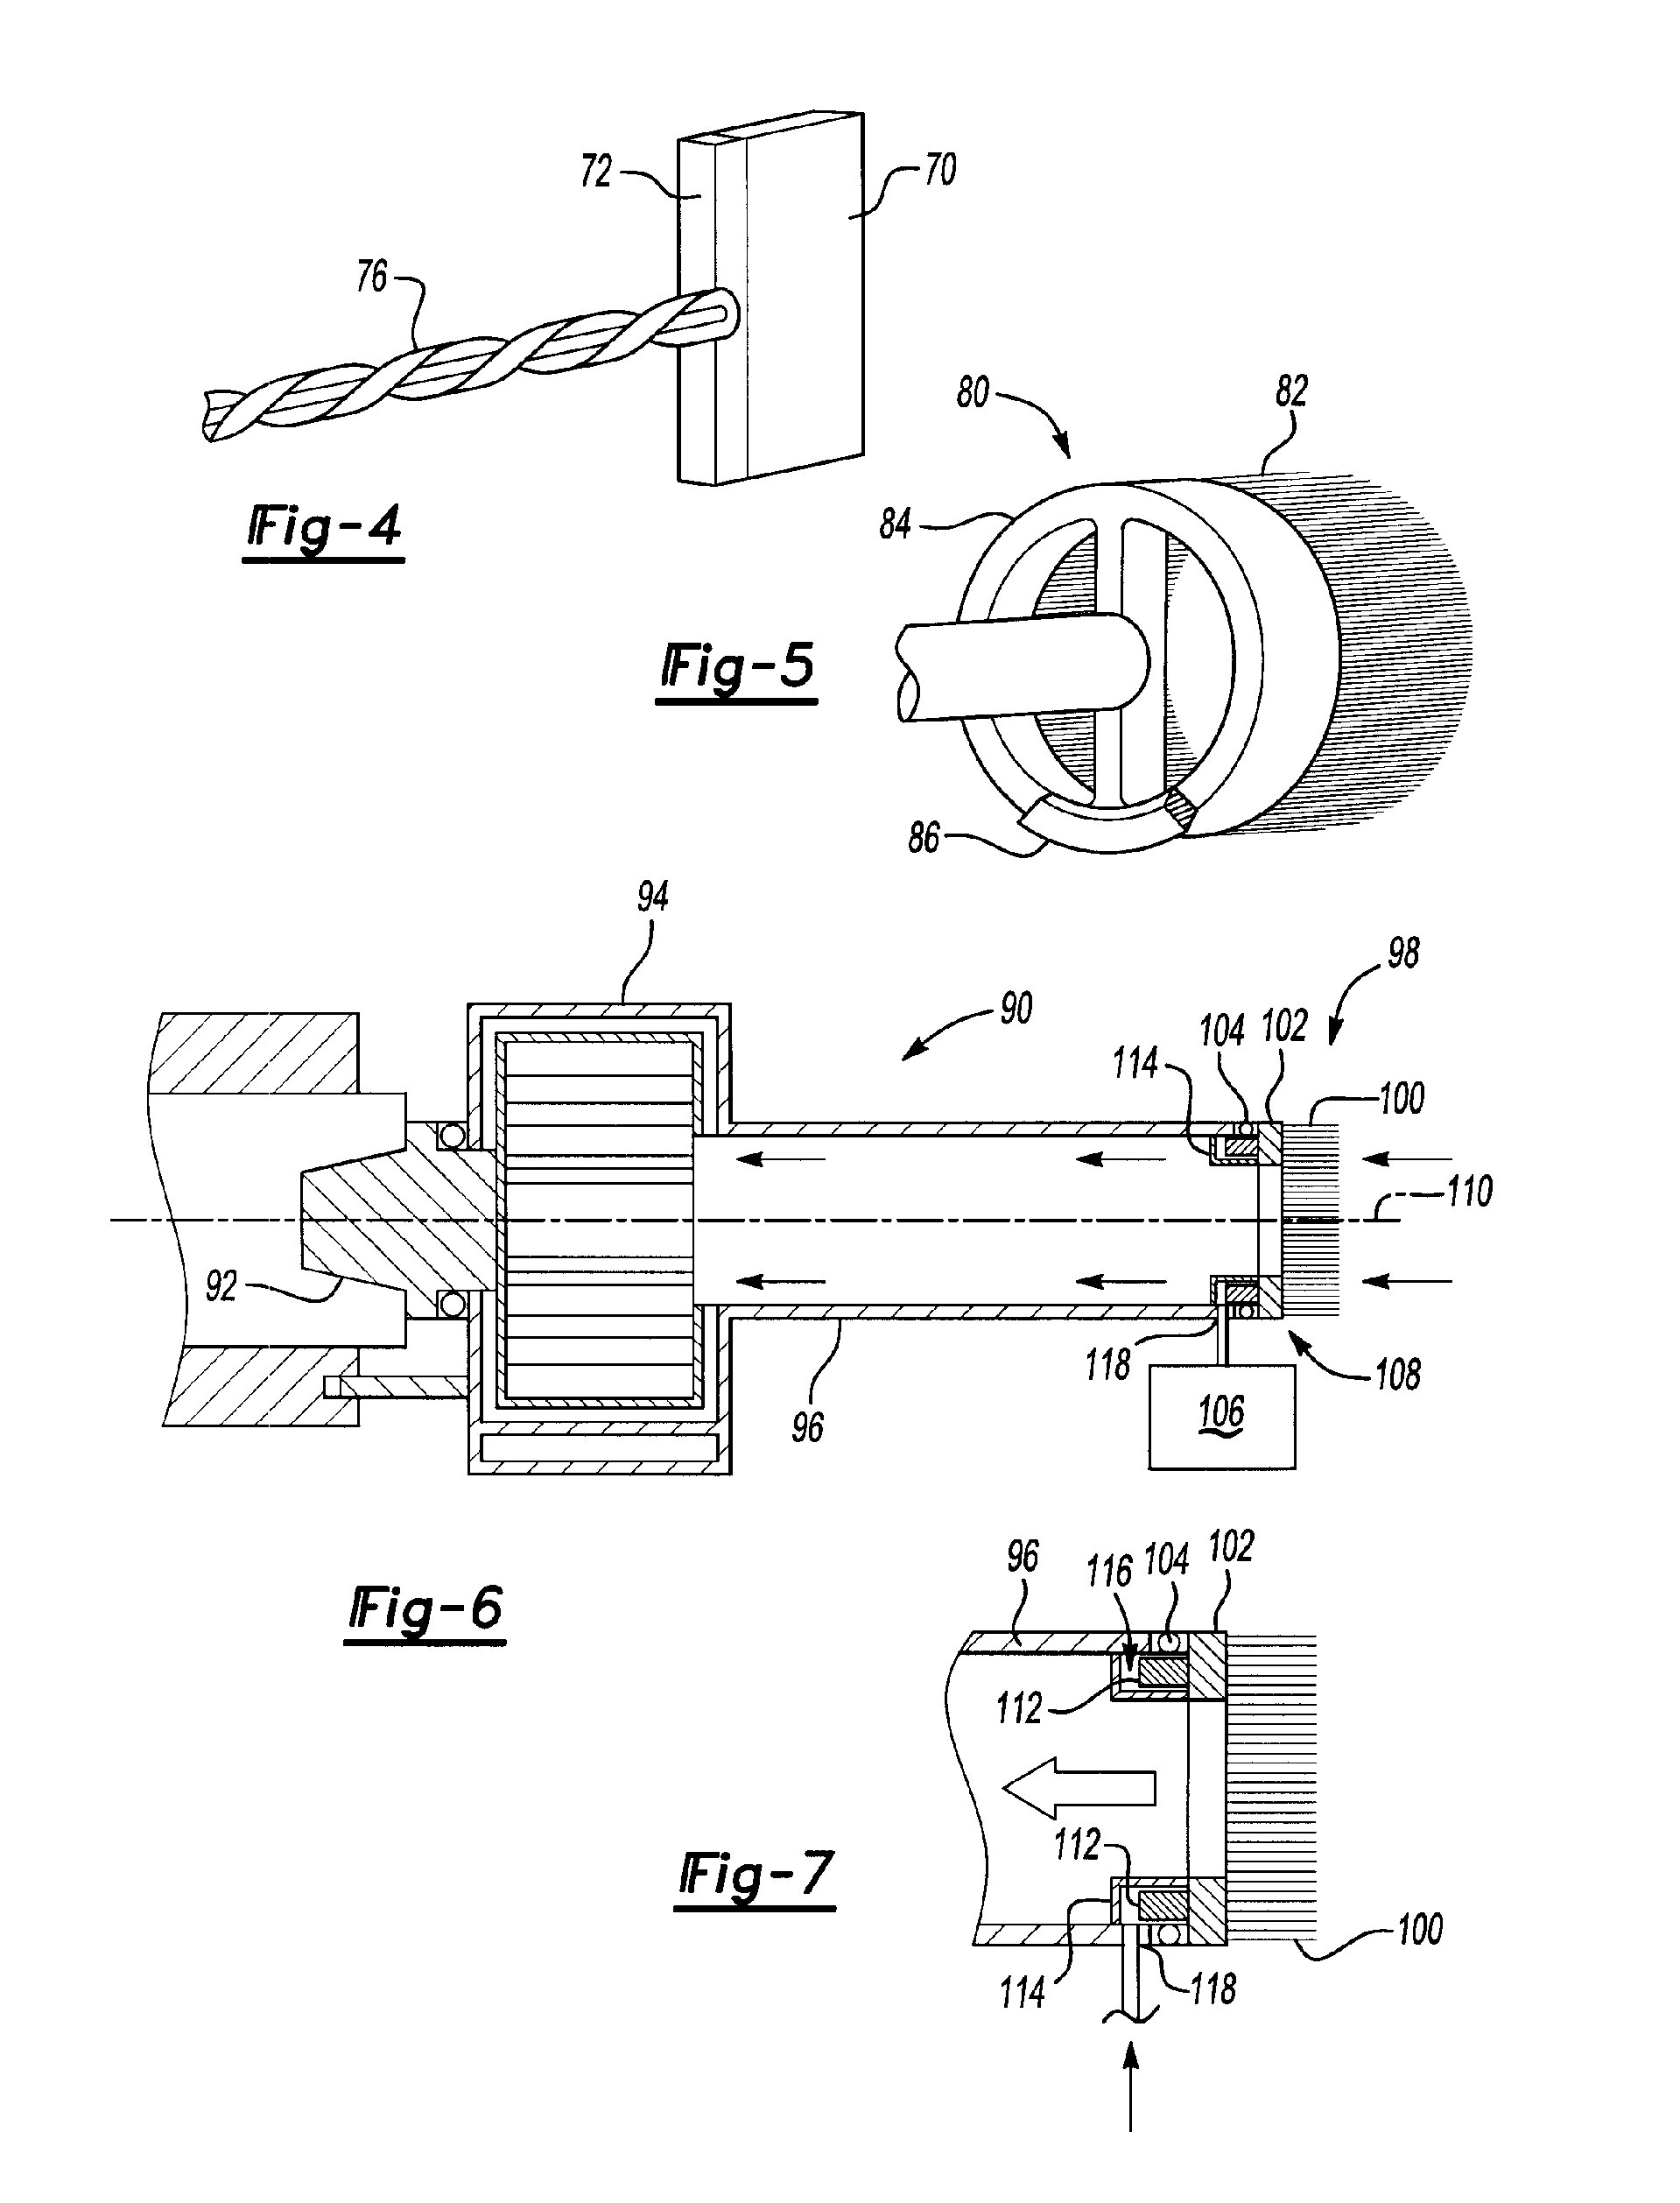 An apparatus for dislodging and removing contaminants from a surface of a machine tool